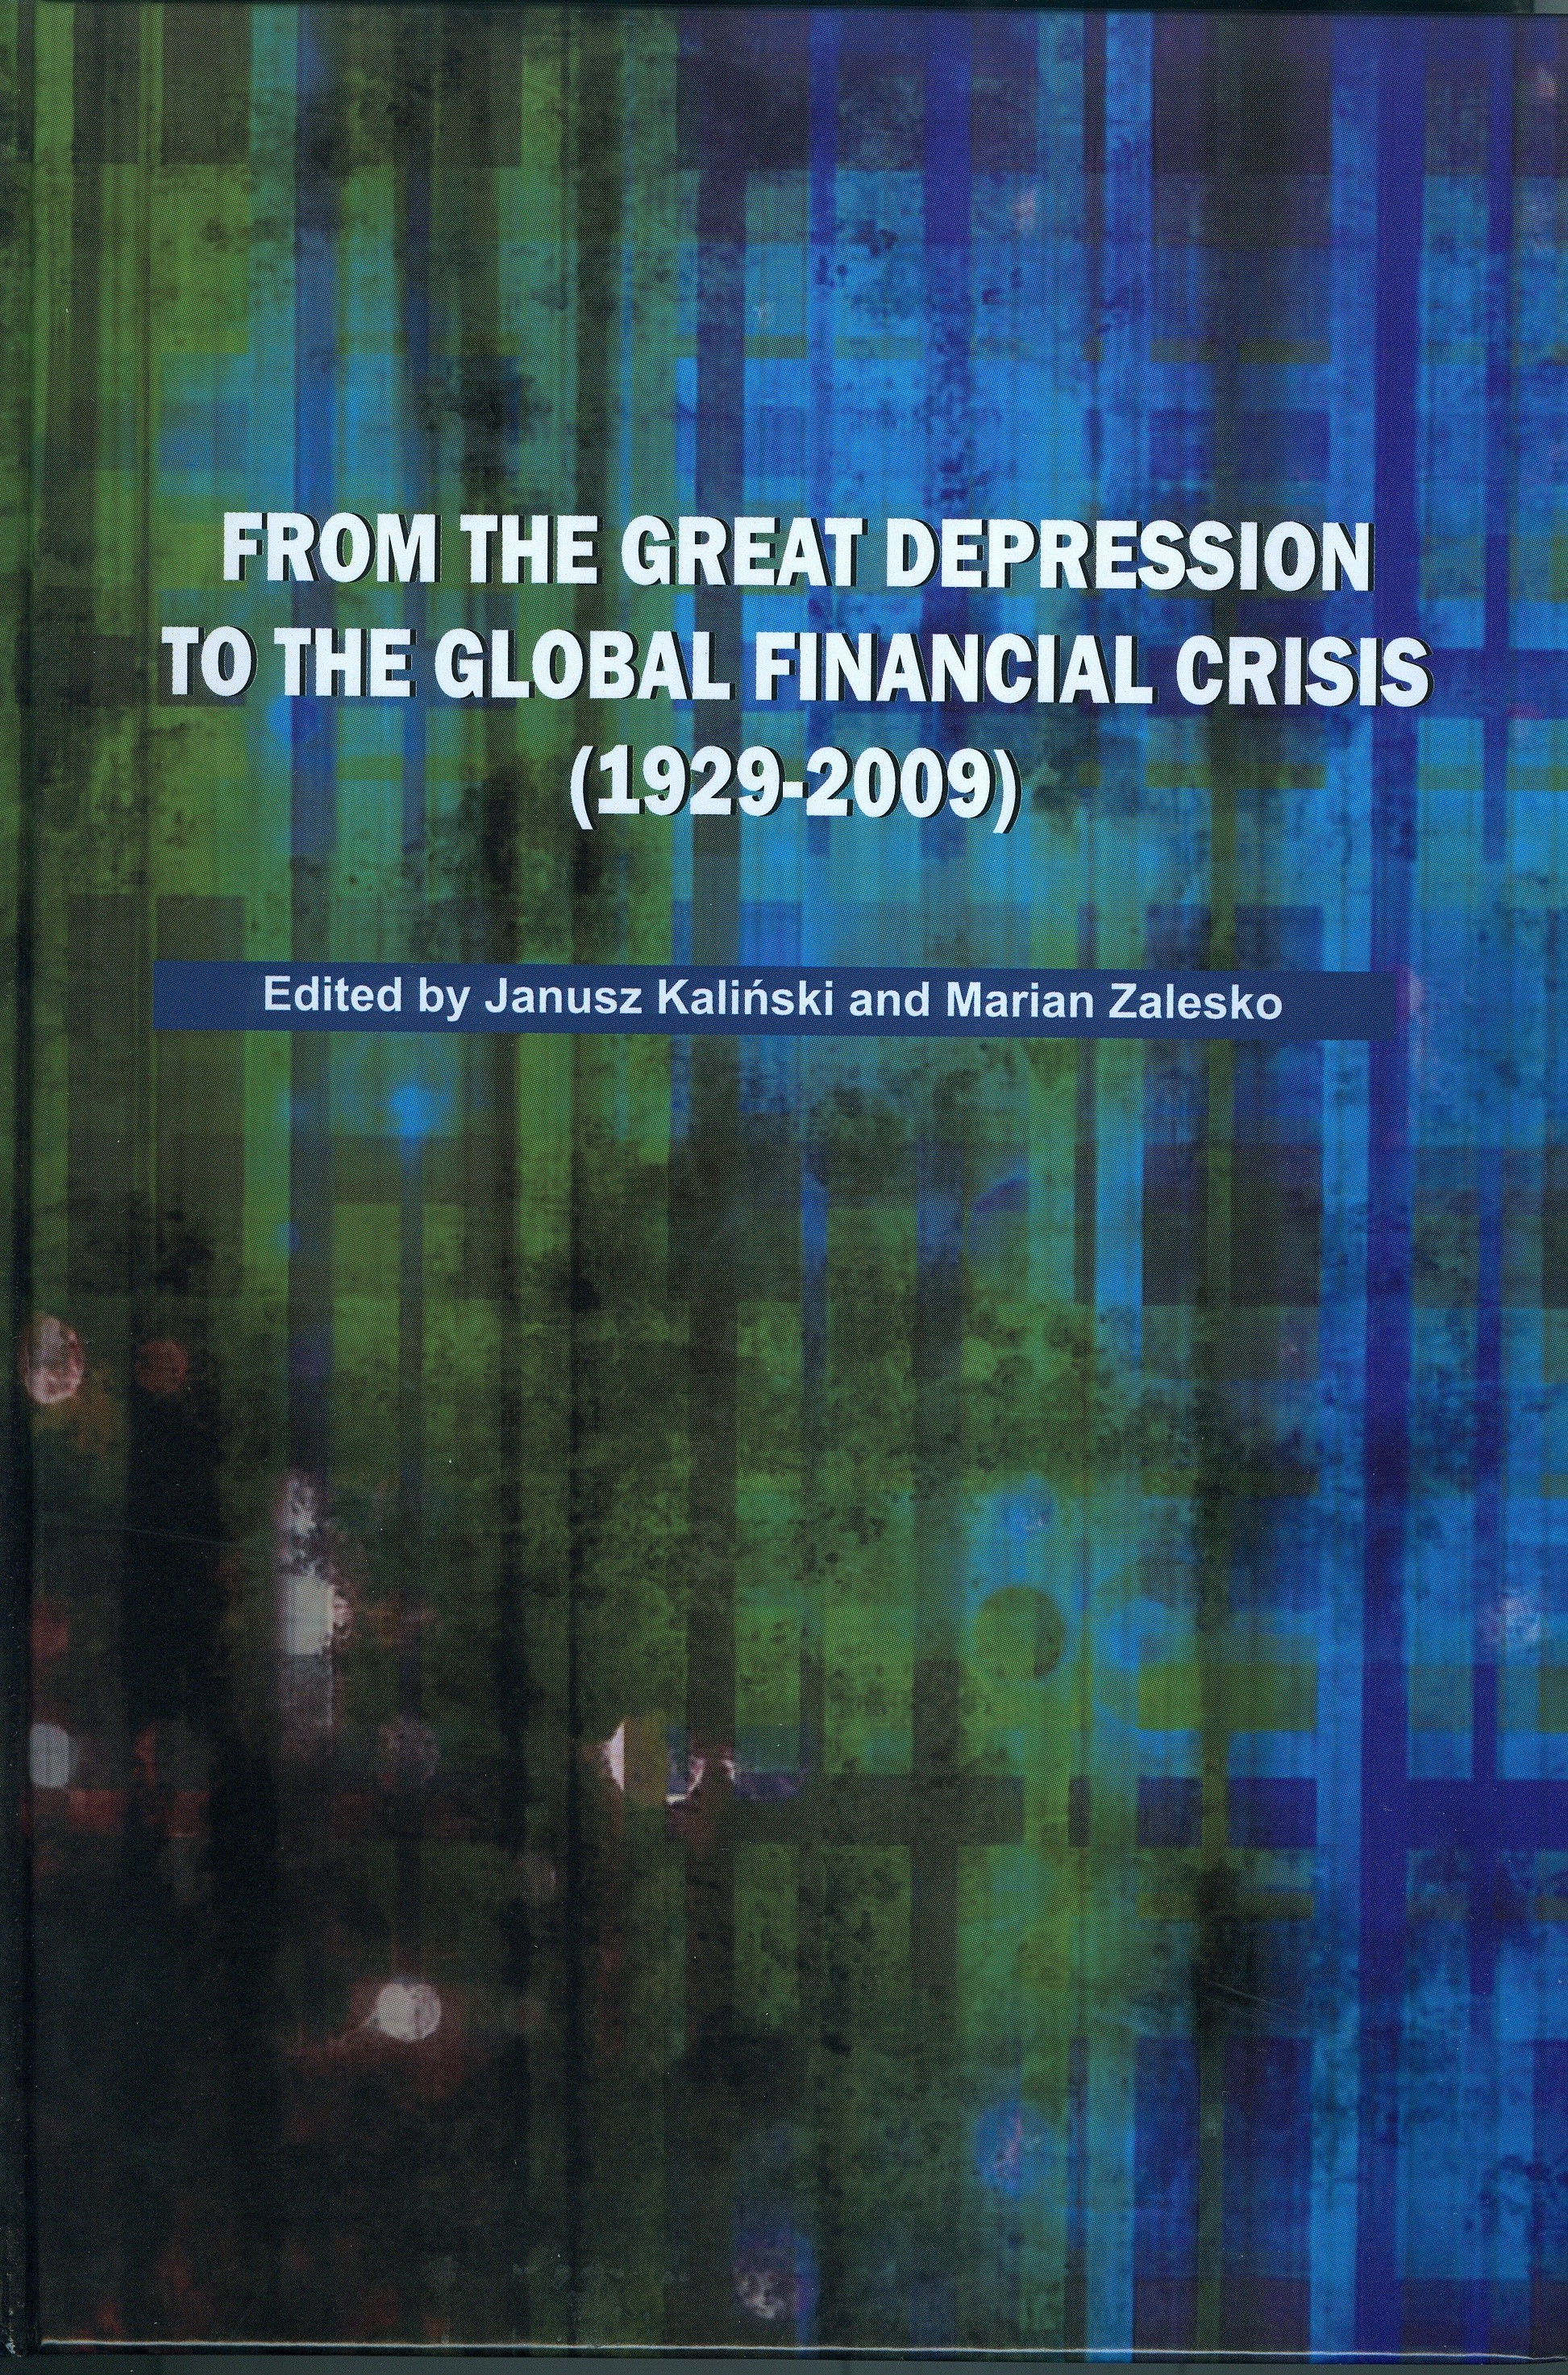 FROM THE GREAT DEPRESSION TO THE GLOBAL FINANCIAL CRISIS (1929 - 2009)